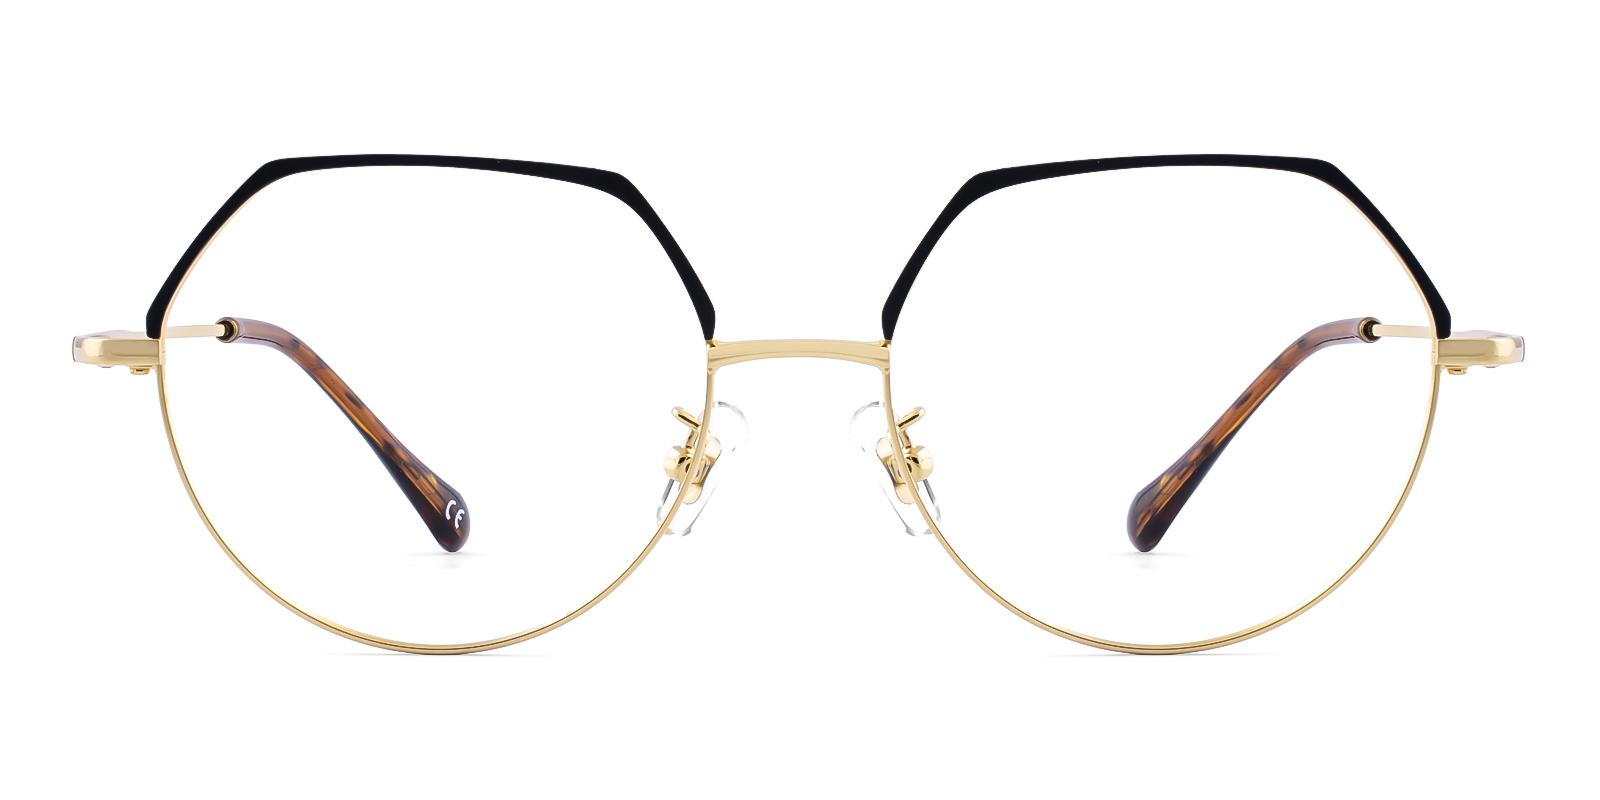 Actie Gold Metal Eyeglasses , NosePads Frames from ABBE Glasses